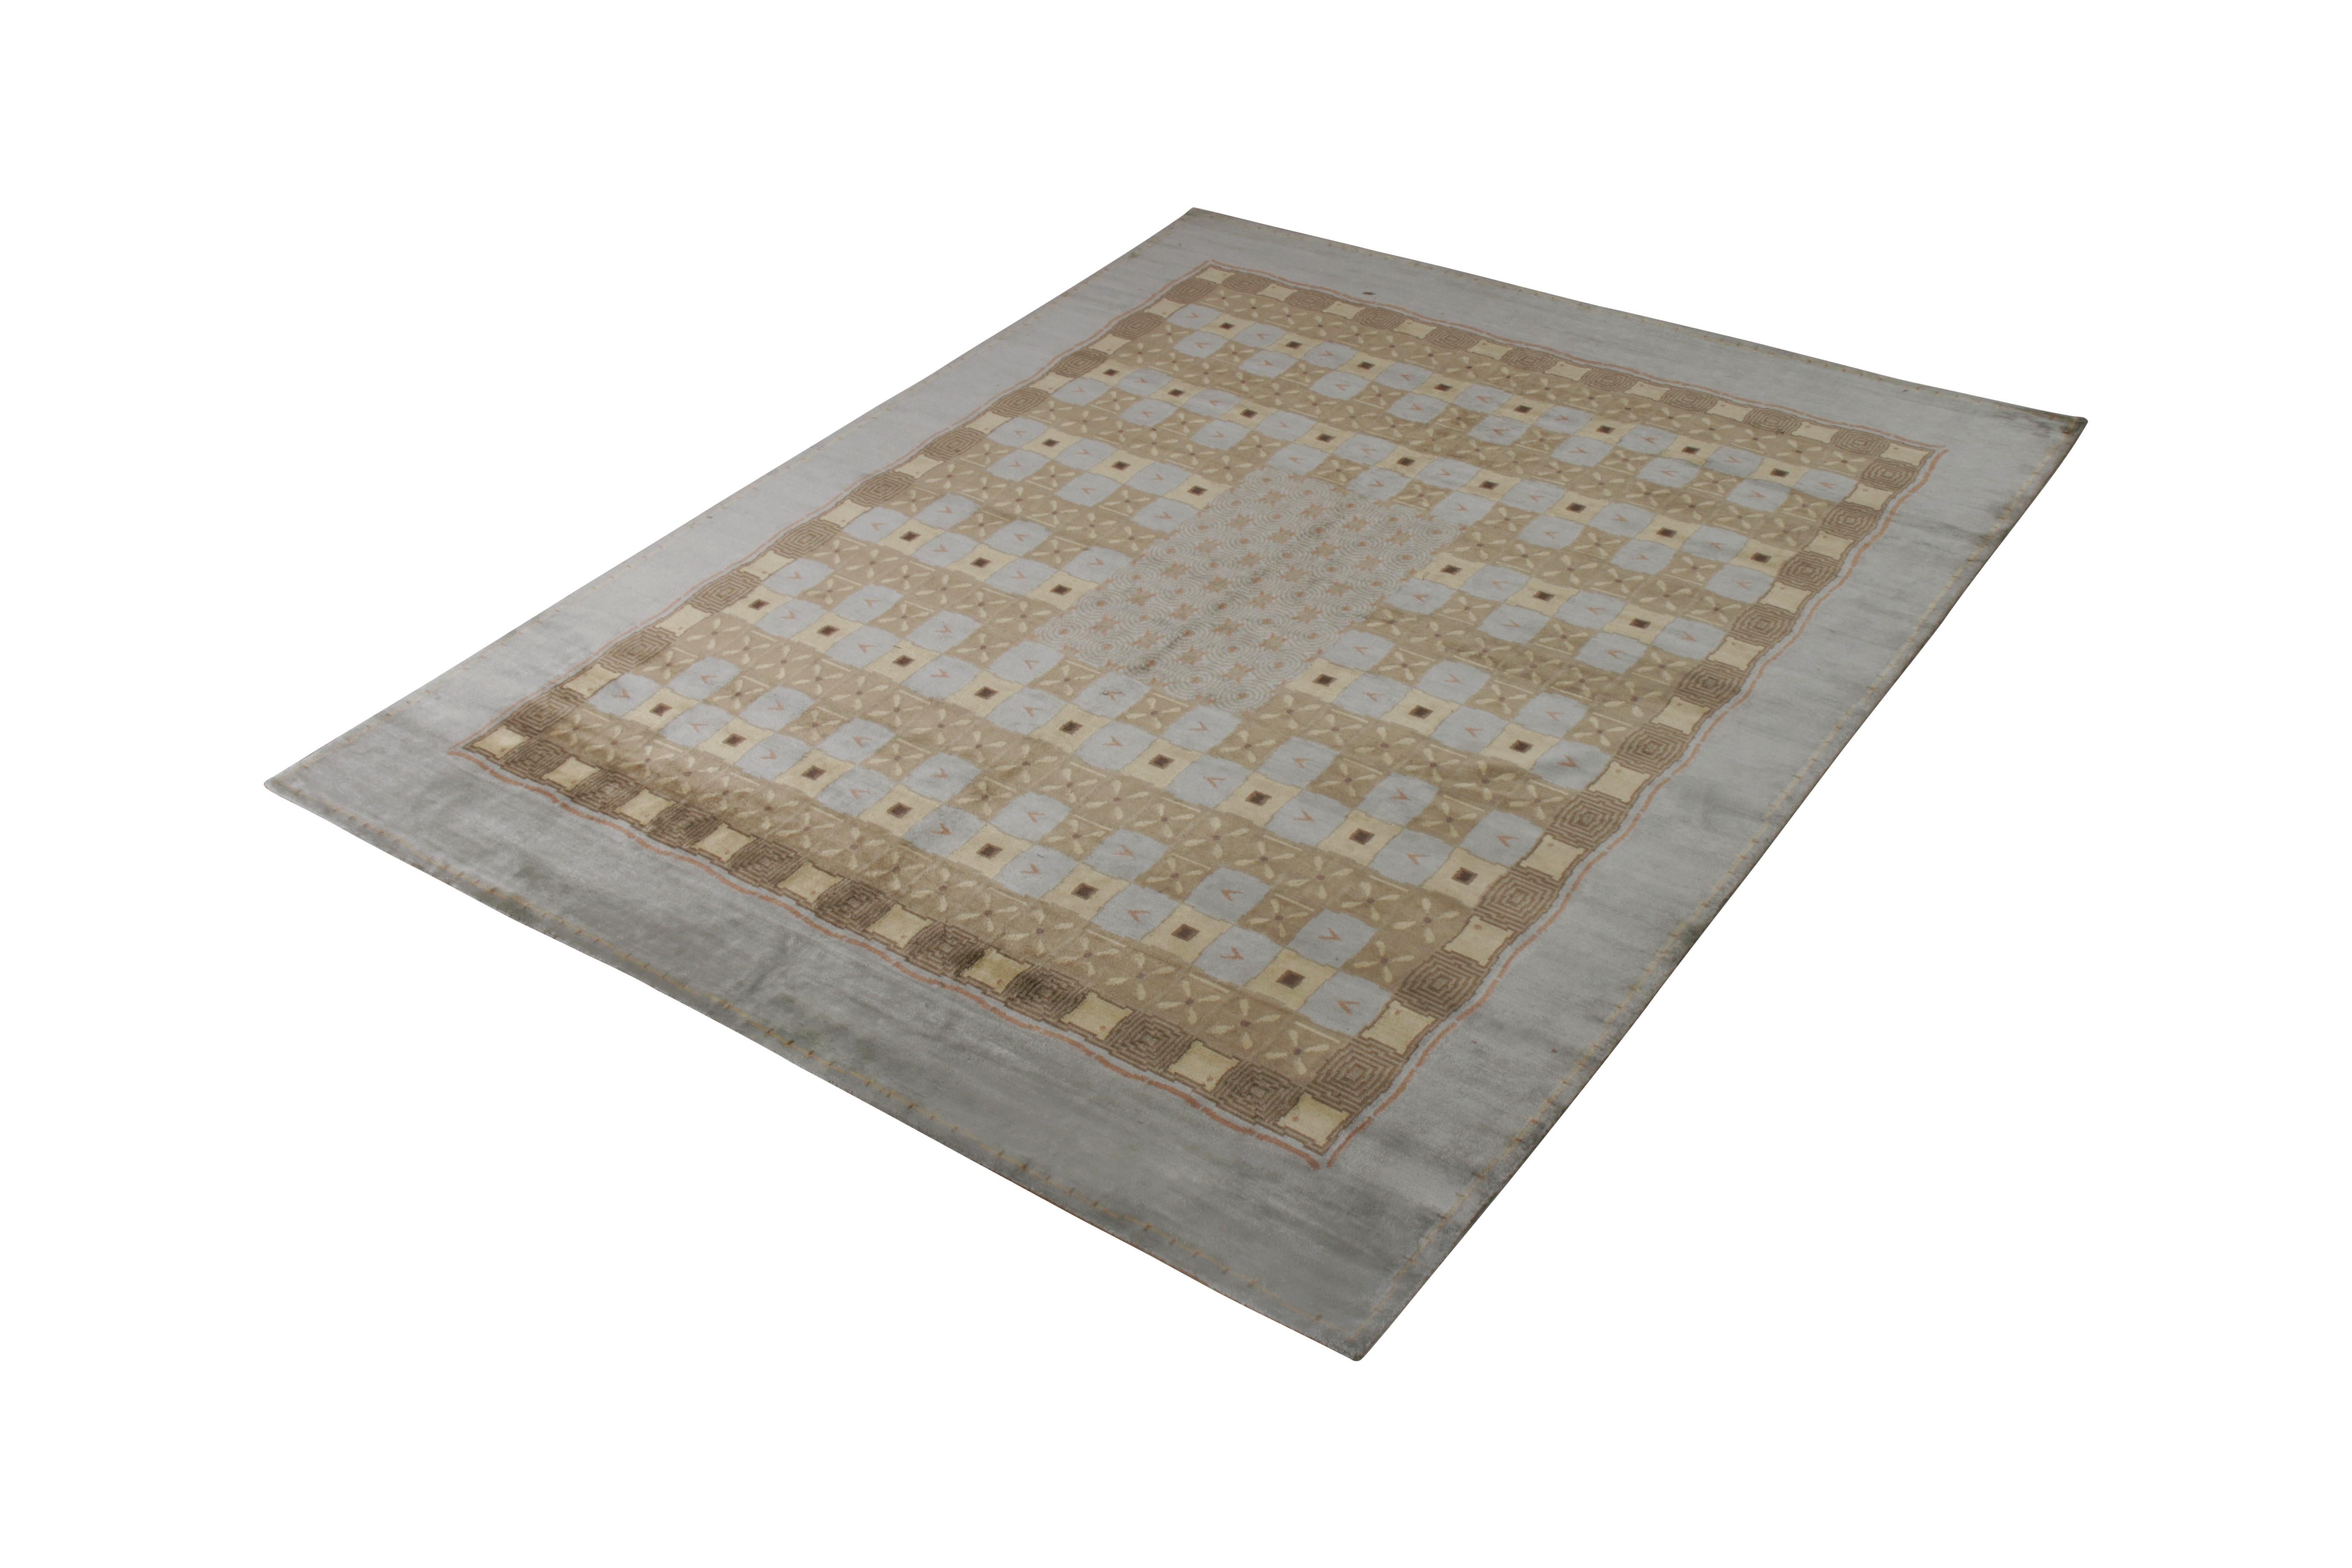 Hand knotted in silk, this 8 x 10 transitional rug is an addition to the European rug collection by Rug & Kilim, affectionately dubbed “Orendi” for the Austrian Deco rug sensibilities of inspiration in this blue and beige-brown geometric